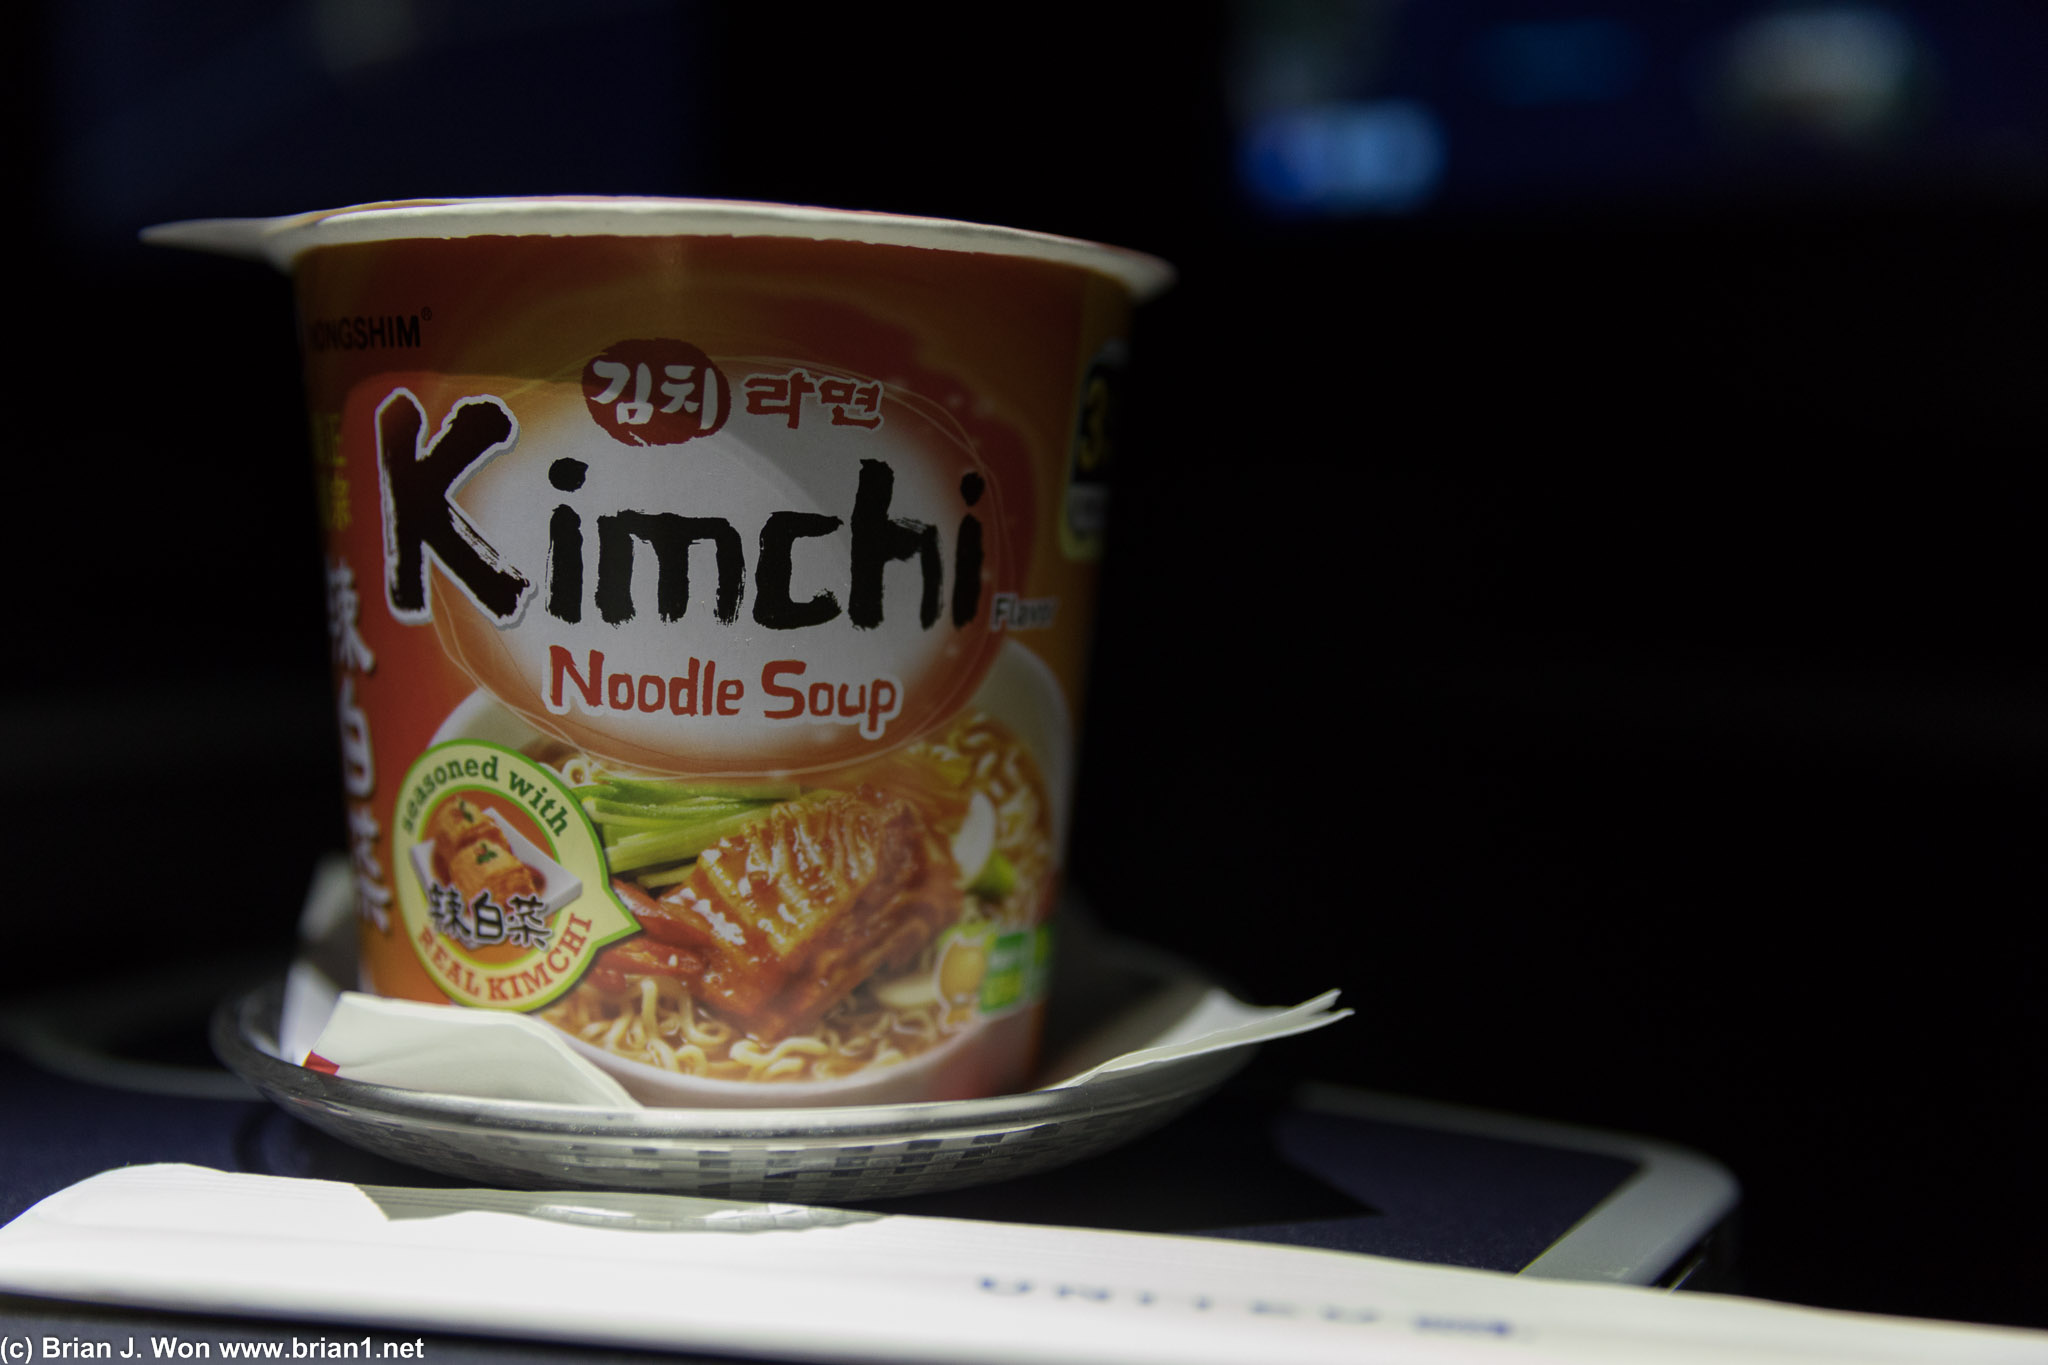 And today's cup noodle is kim chi flavor.